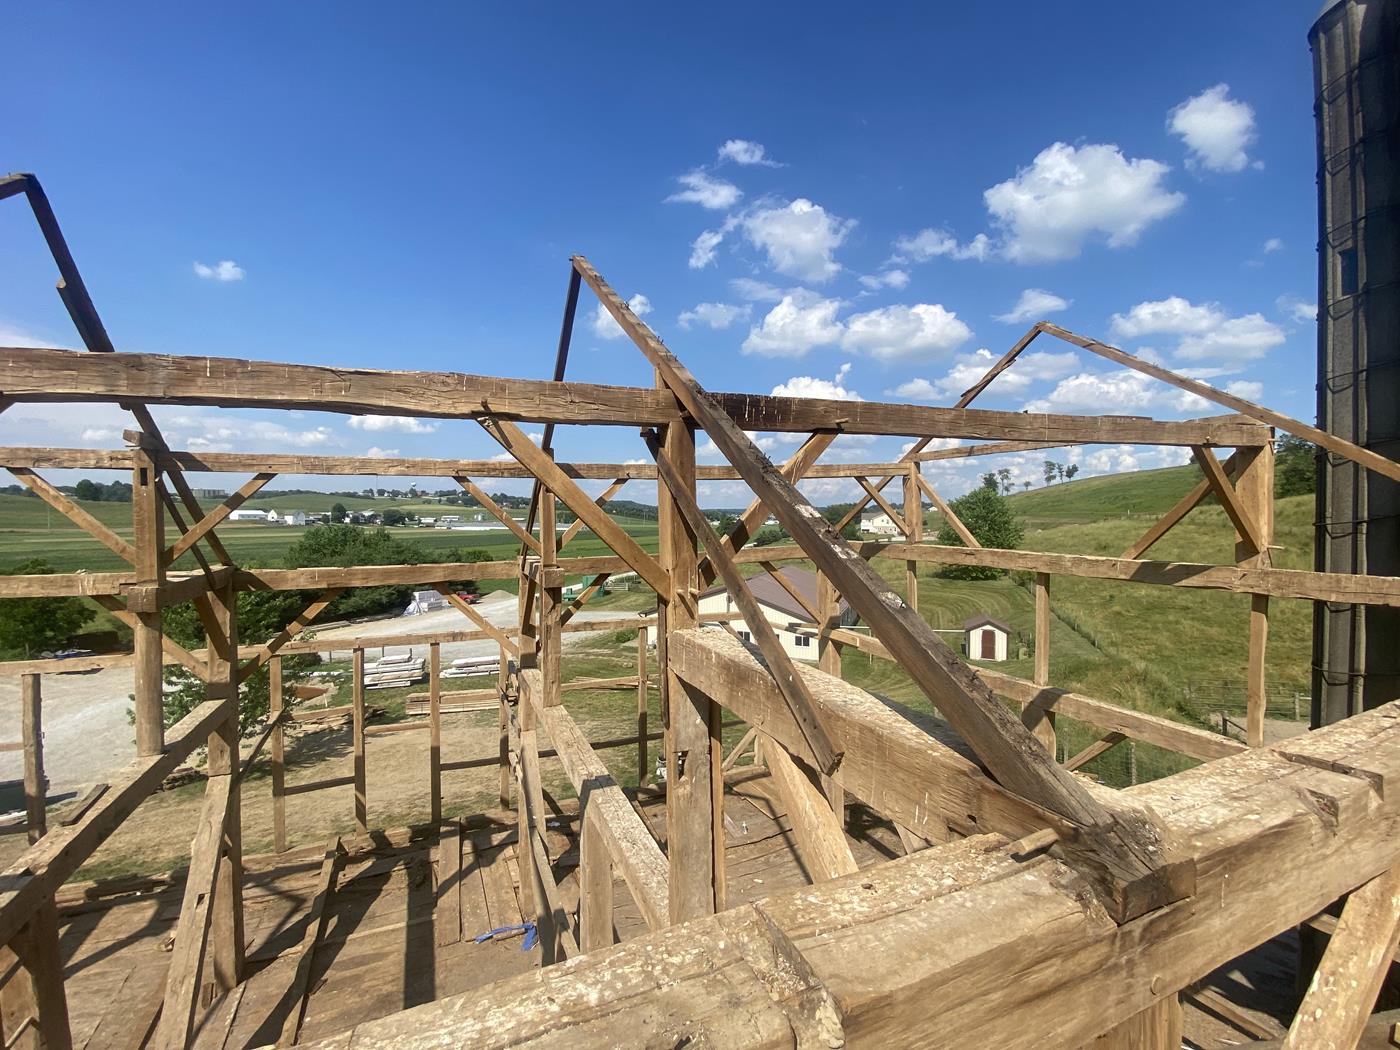 https://www.ohiovalleybarnsalvage.com/images/Beachy Historic Ohio Barn Frame - Your Source For Sawn Barn Timbers